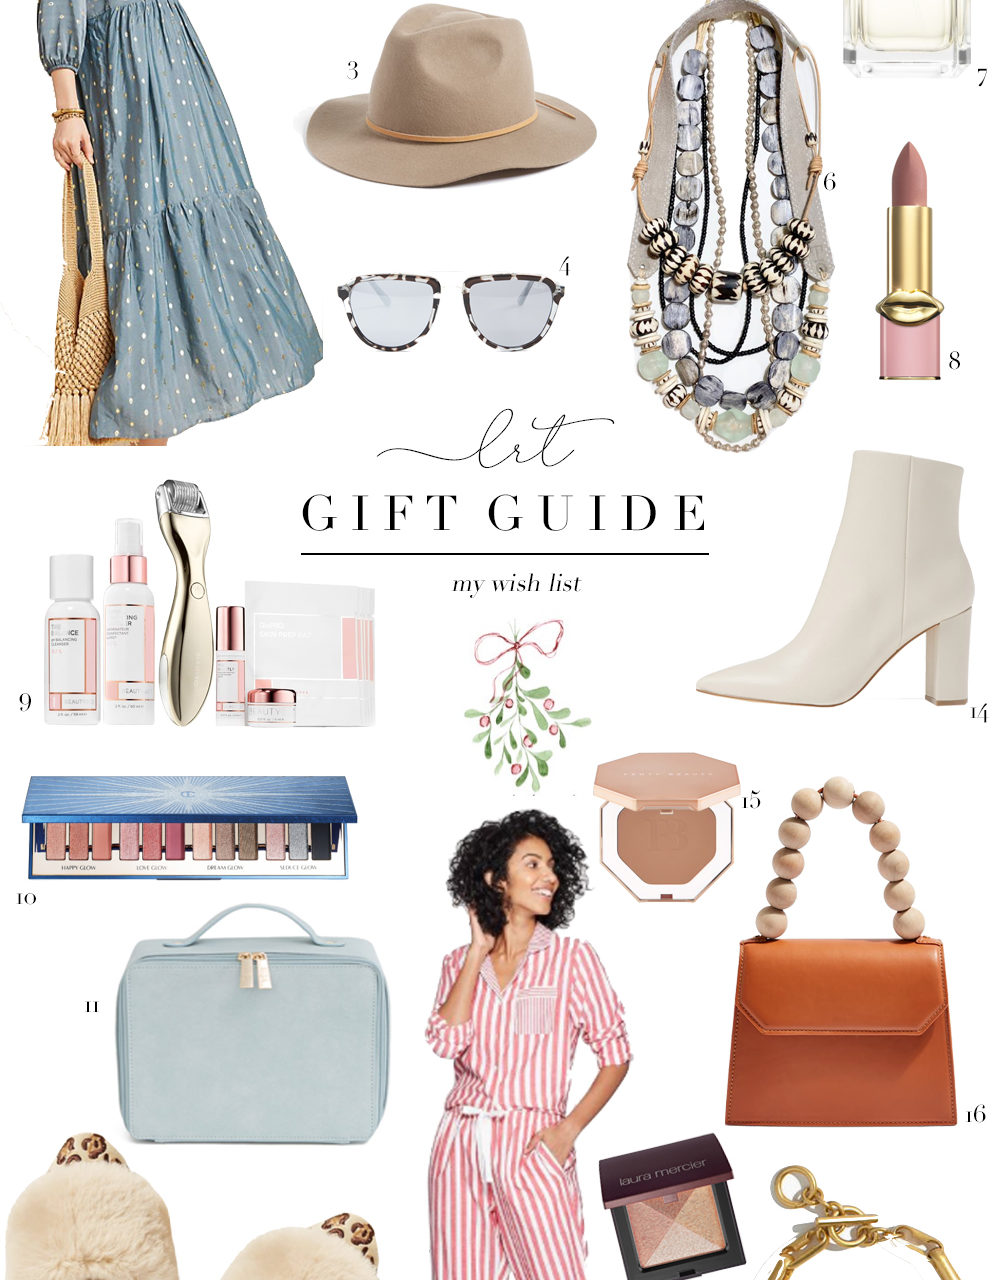 Gift Guide: What’s on my wish list